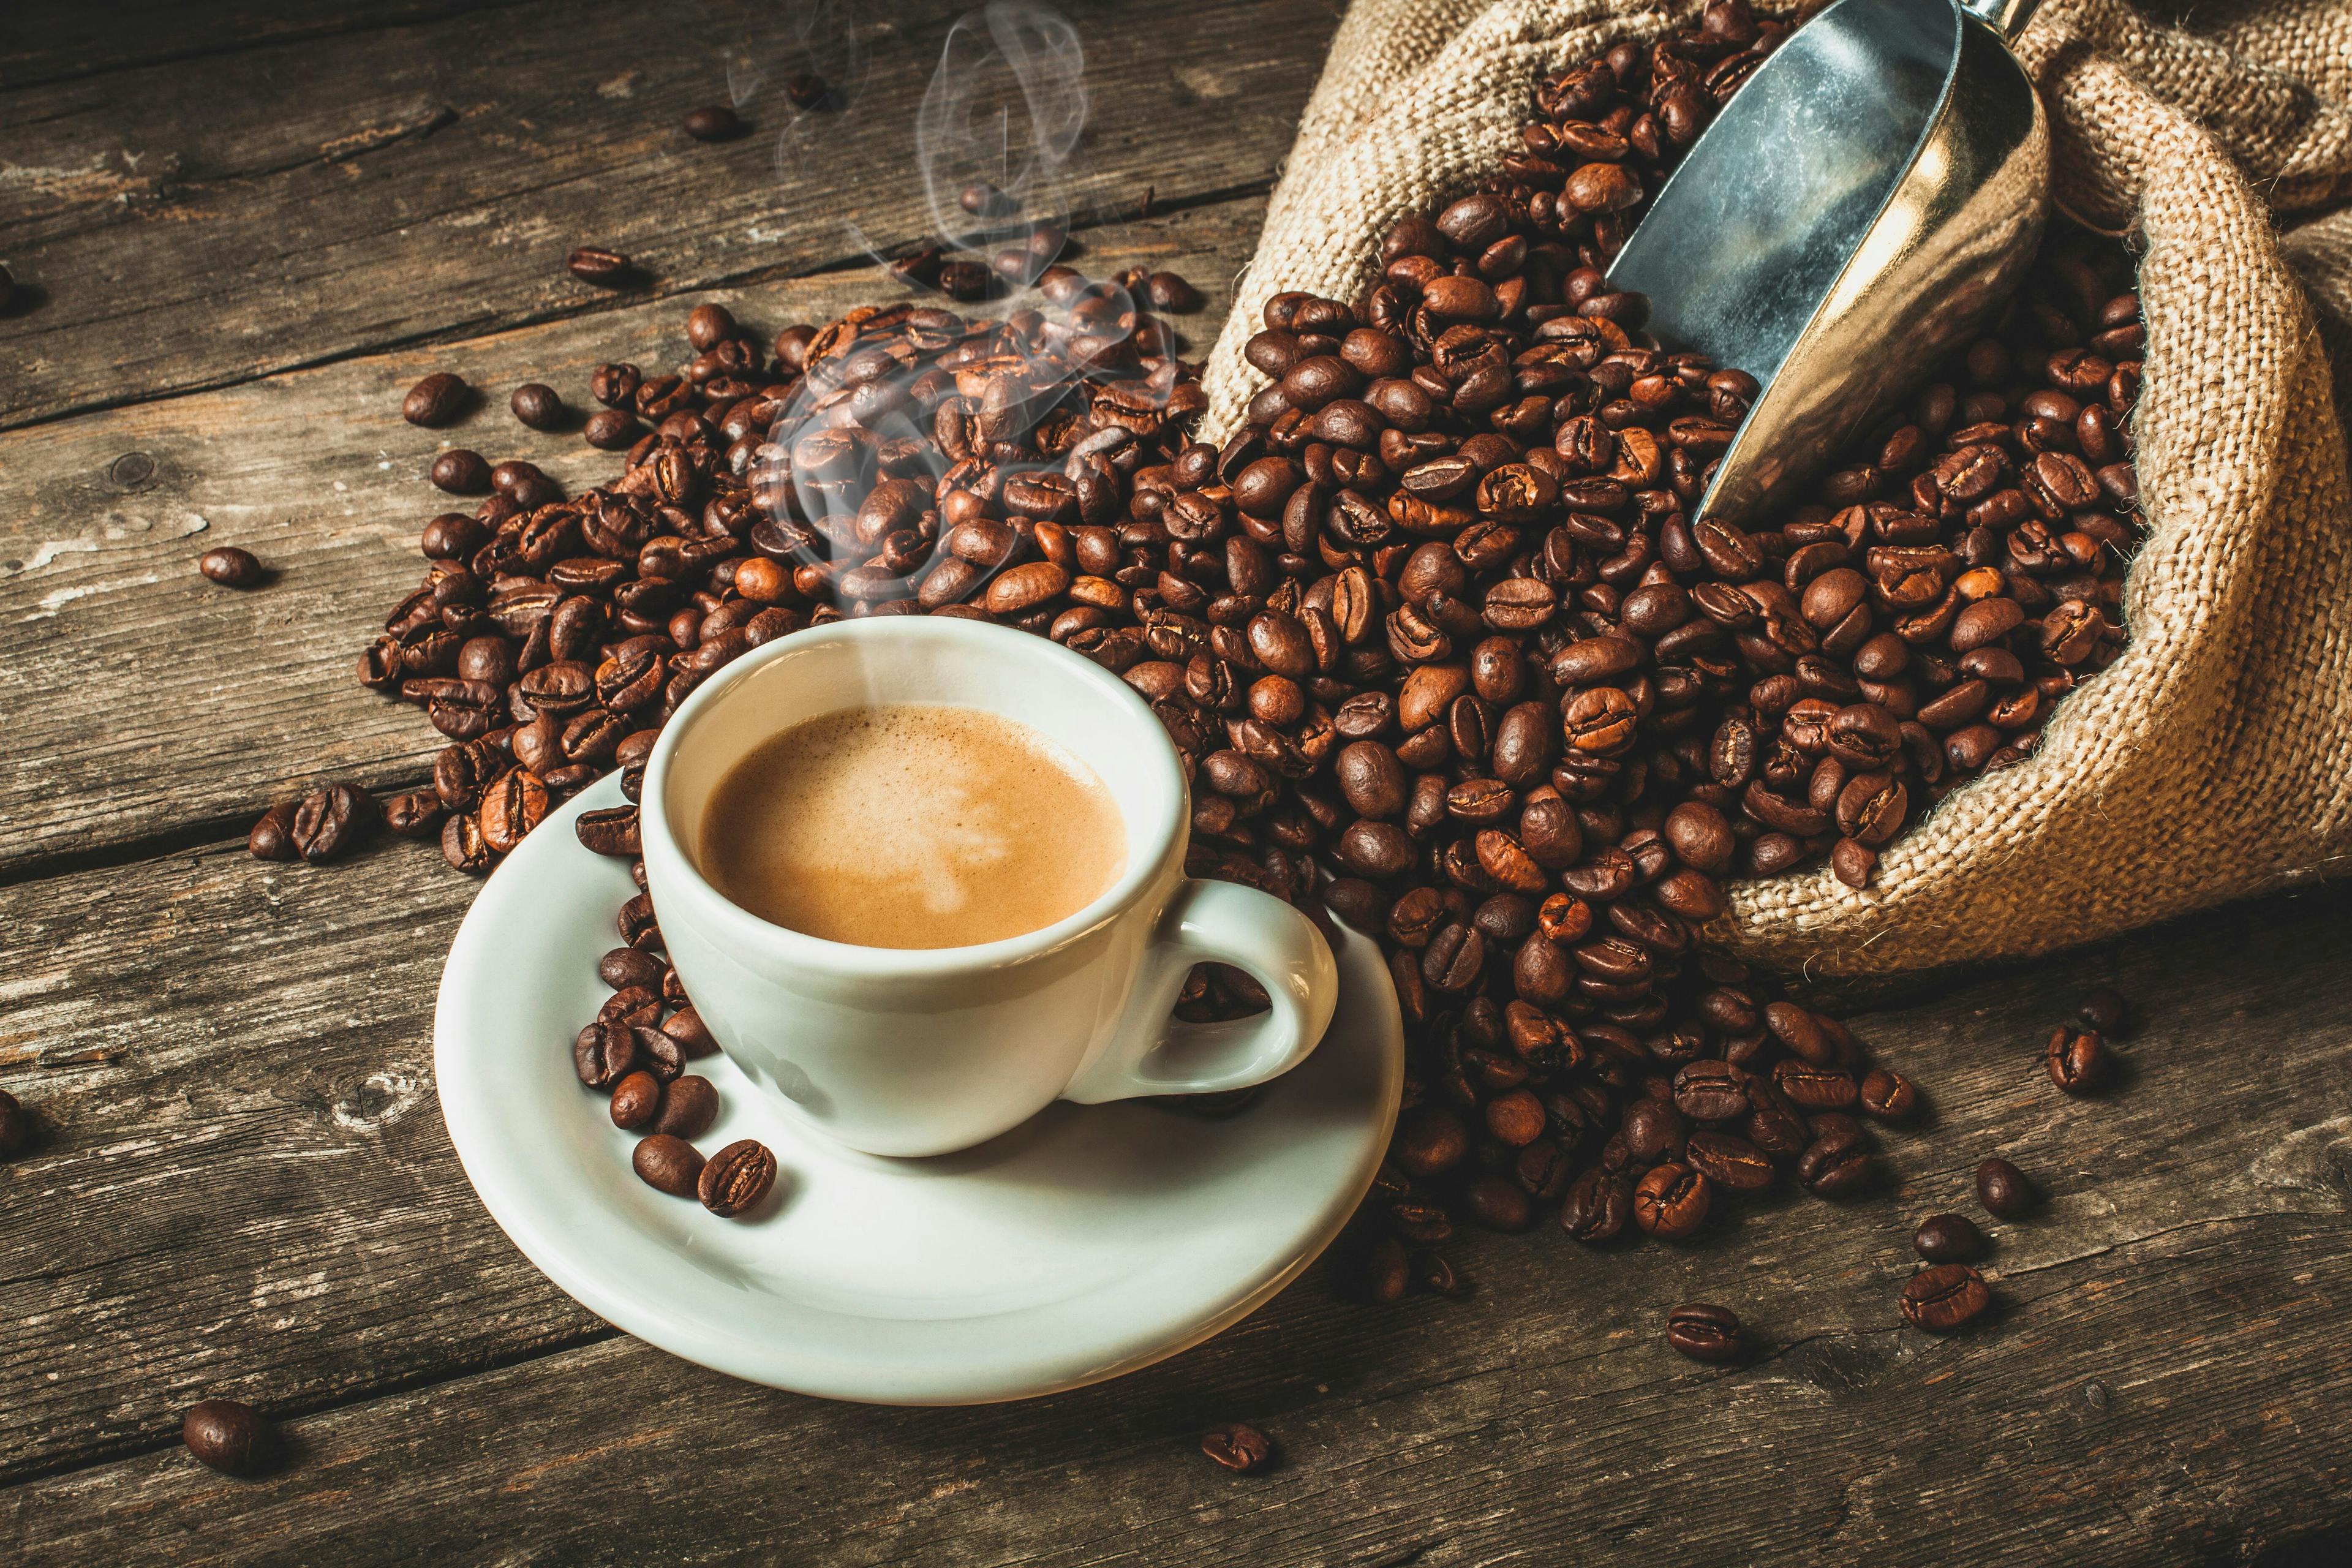 Coffee May Be Unexpected Protectant Against COVID-19 Infection